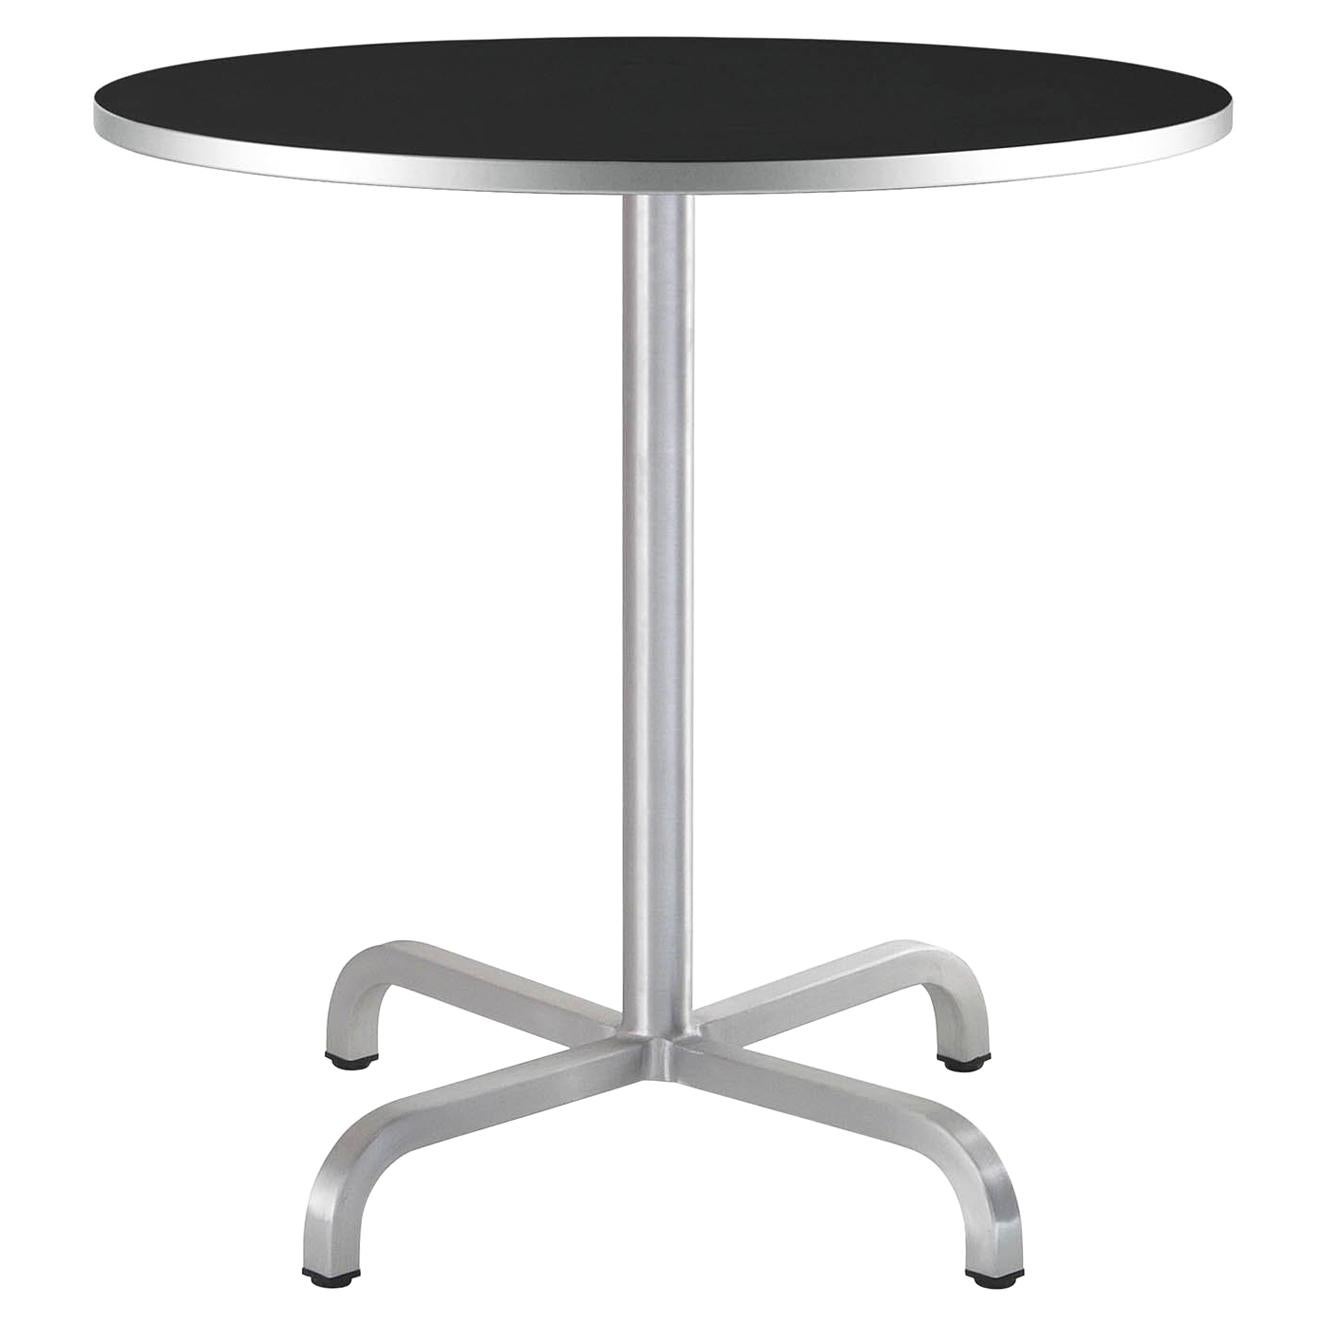 Emeco 20-06 Medium Round Café Table with Black Laminate Top by Norman Foster